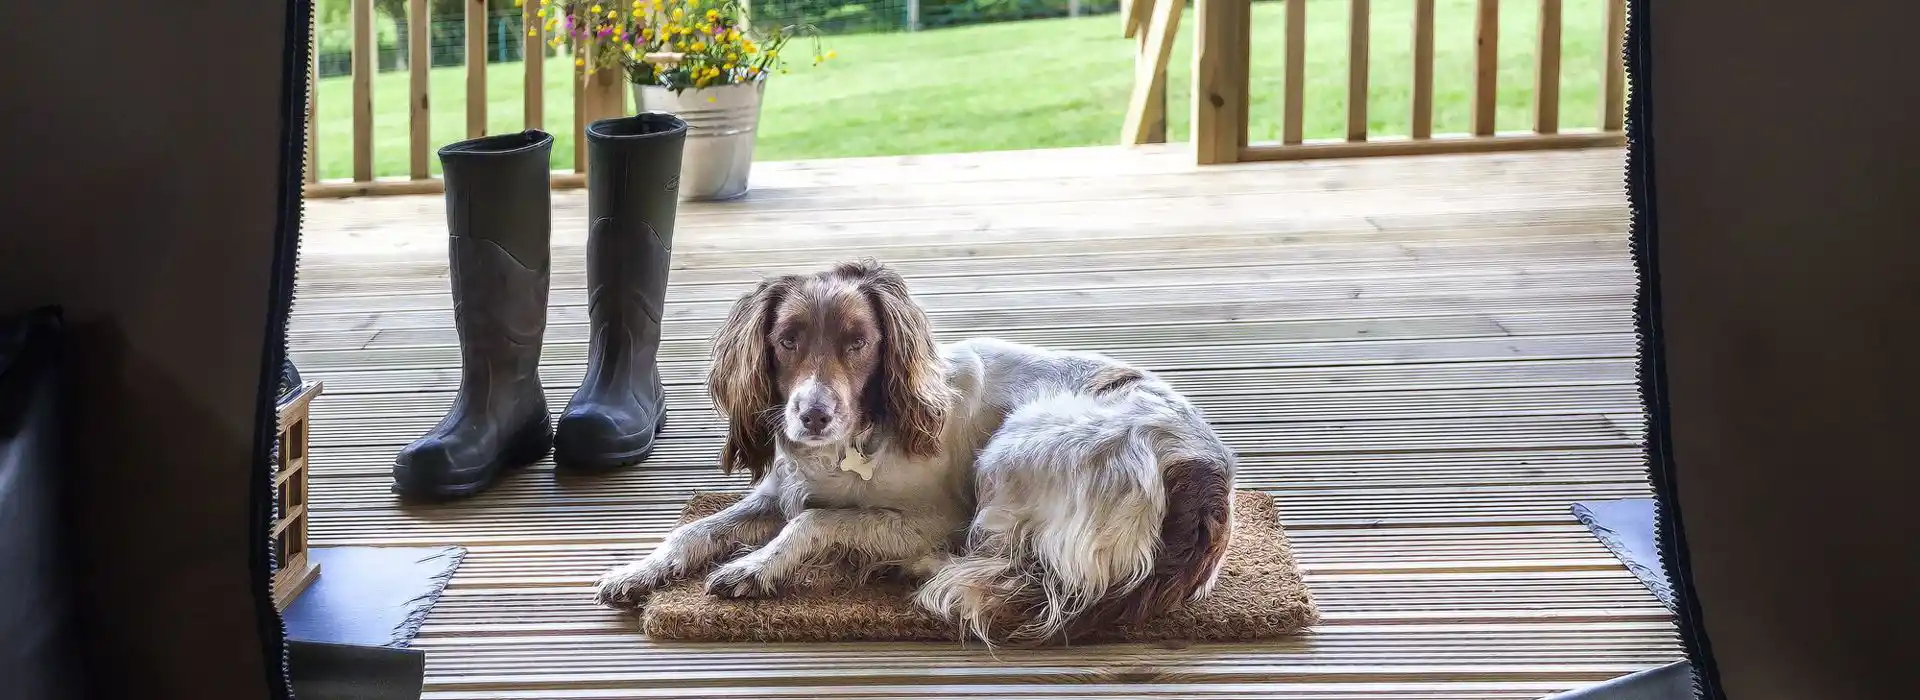 Dog friendly glamping in Wales